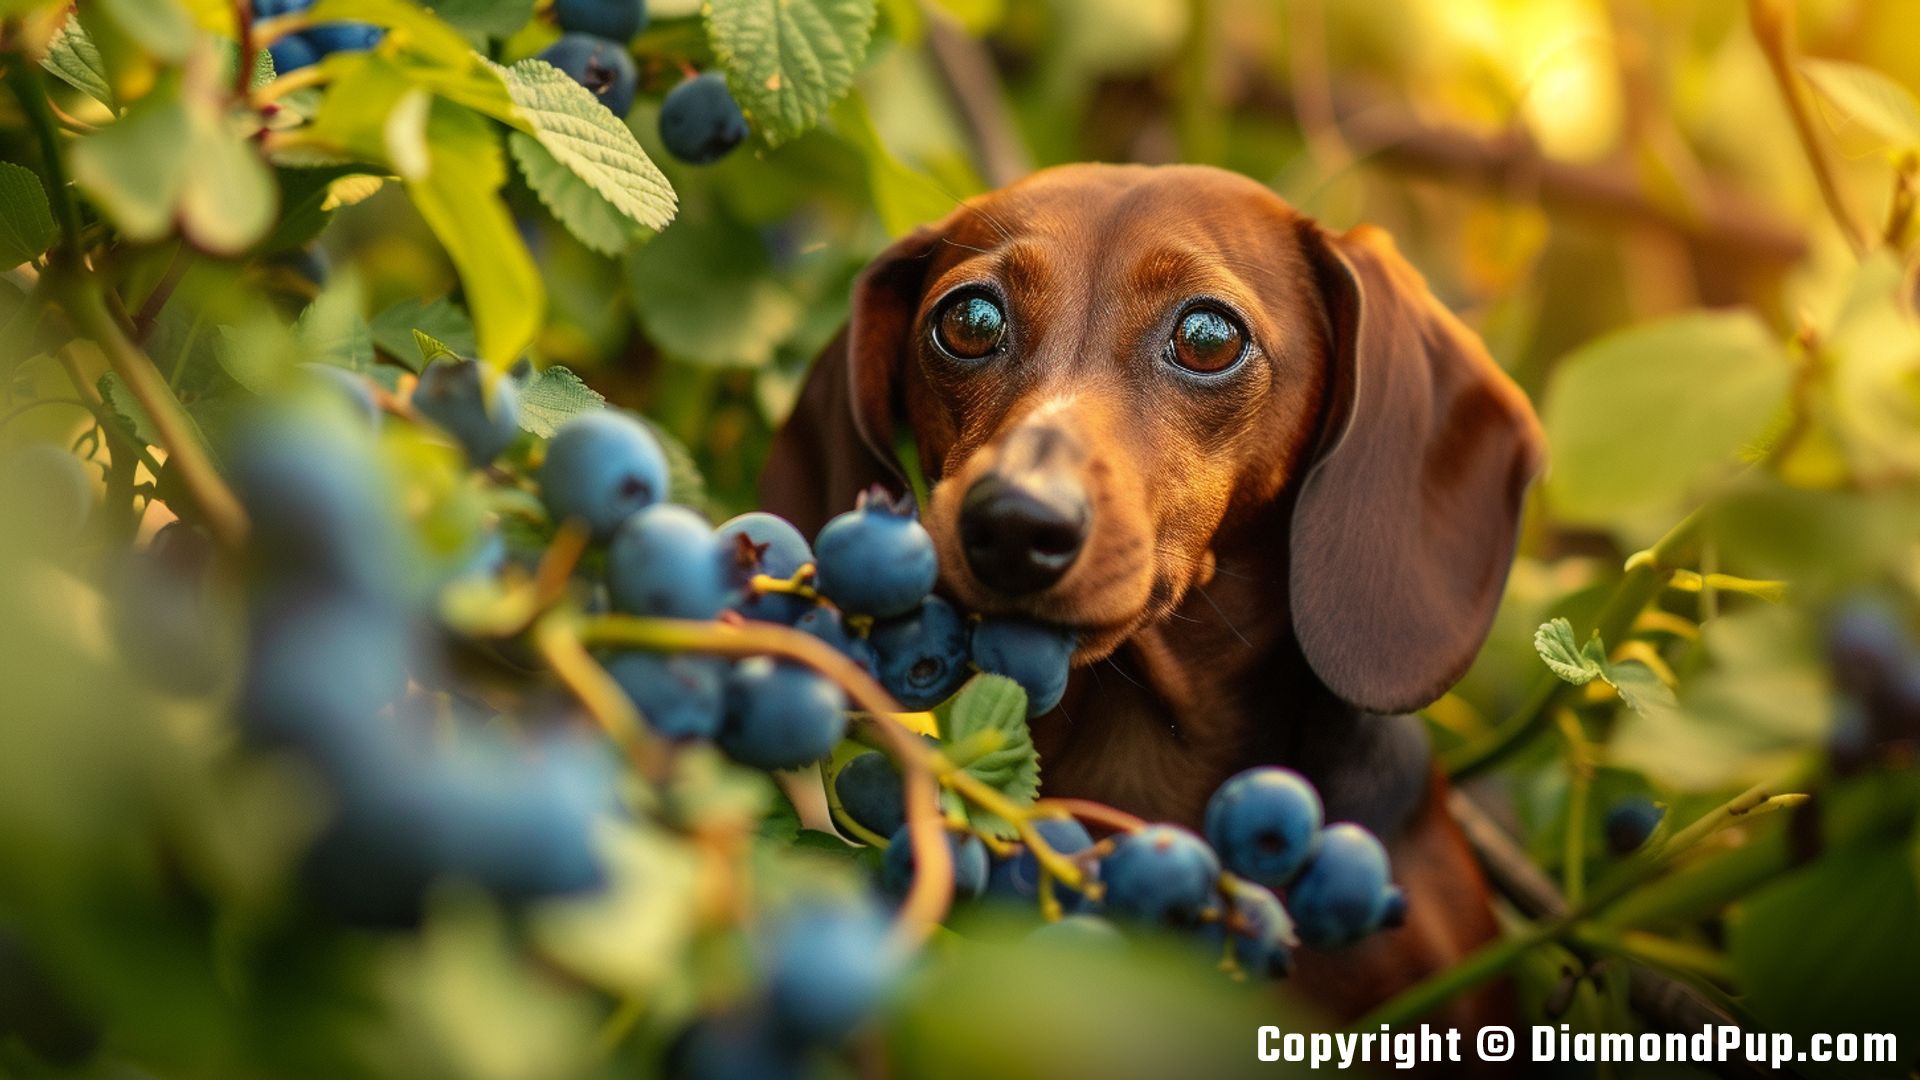 Image of a Playful Dachshund Eating Blueberries